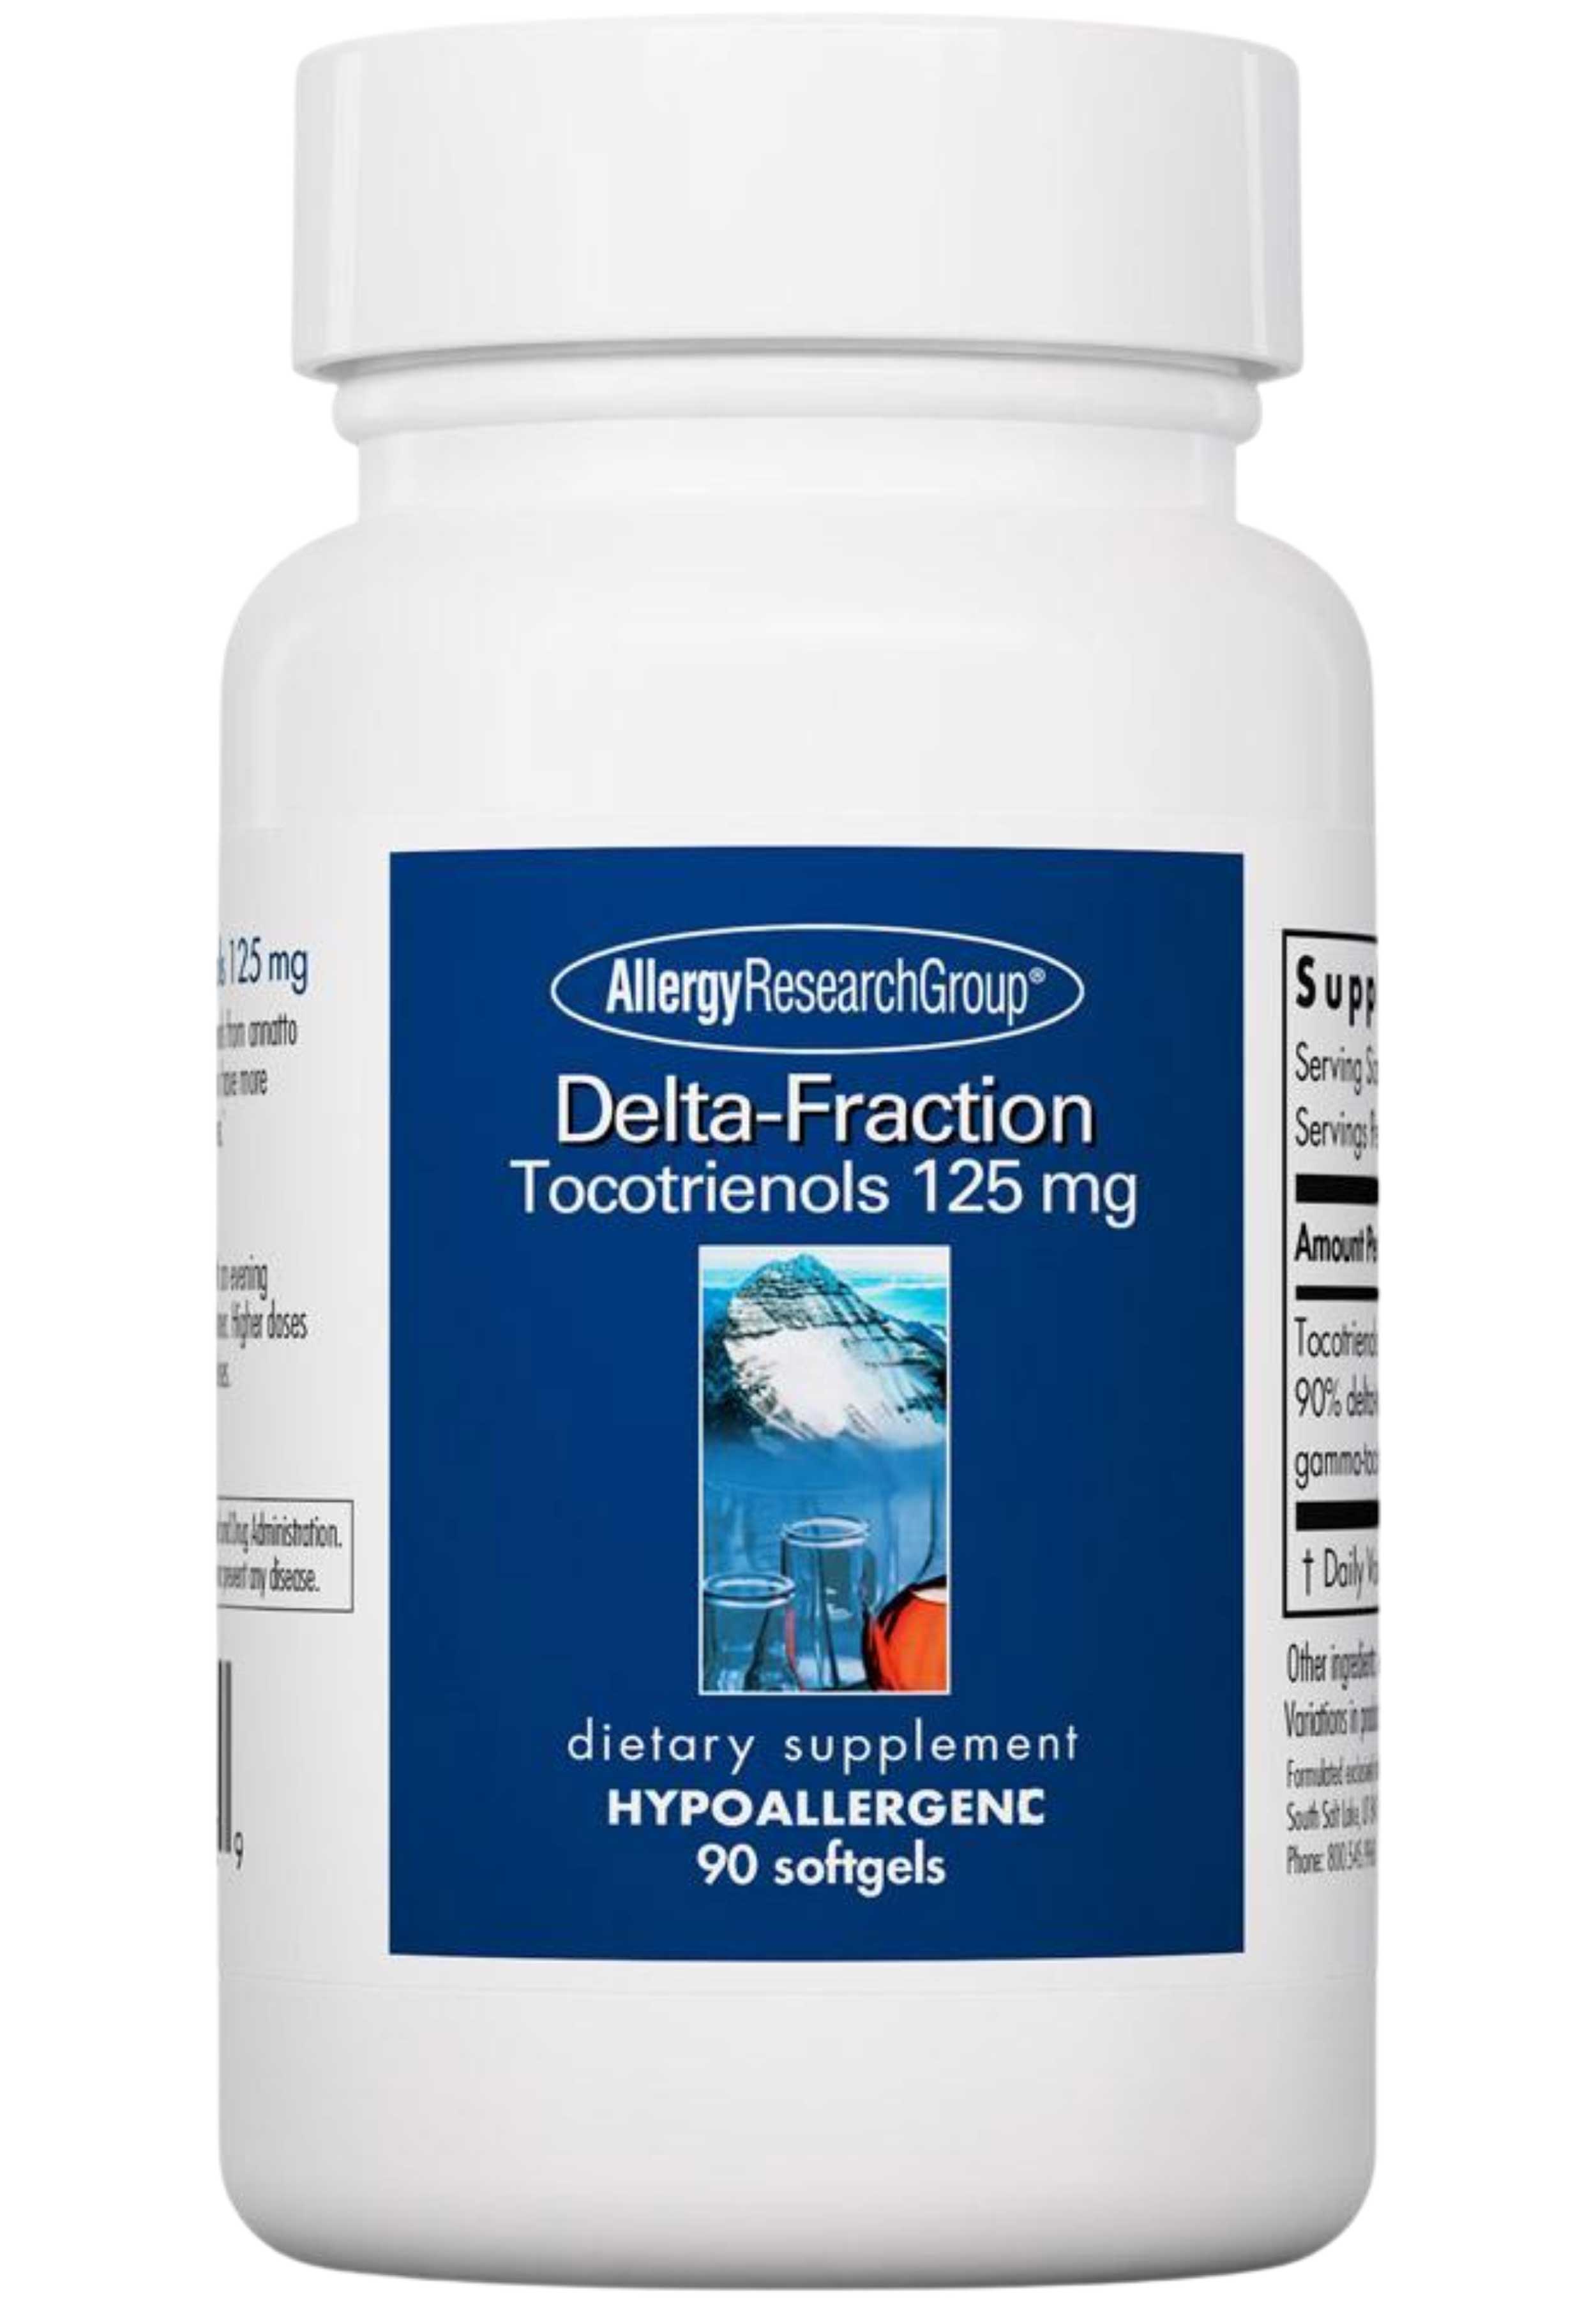 Allergy Research Group Delta-Fraction Tocotrienols 125 mg